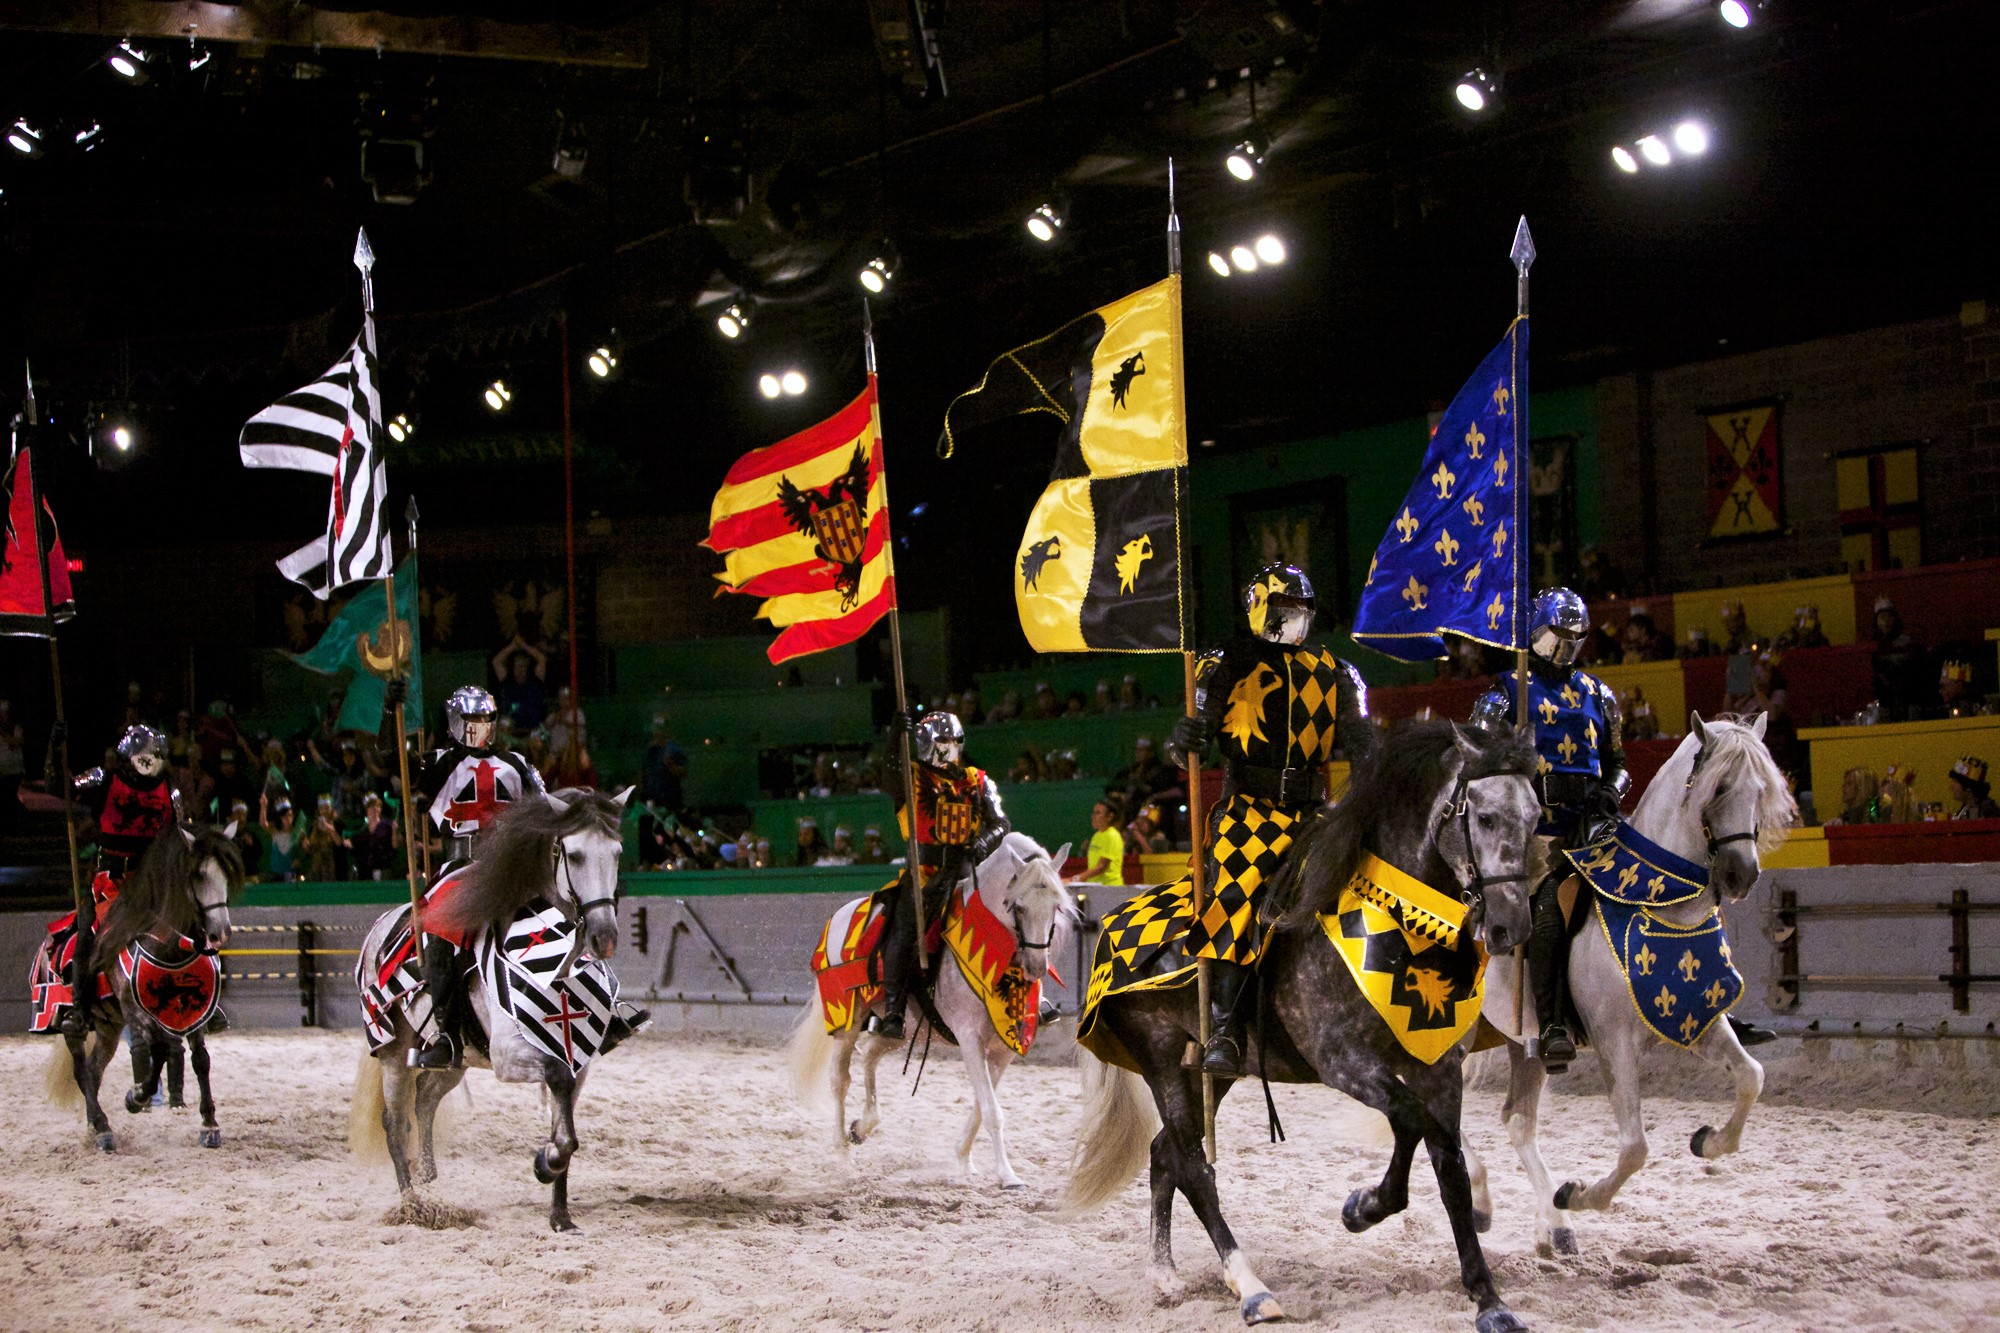 5 Trivia Facts About Medieval Times 🏰 - Medieval Times